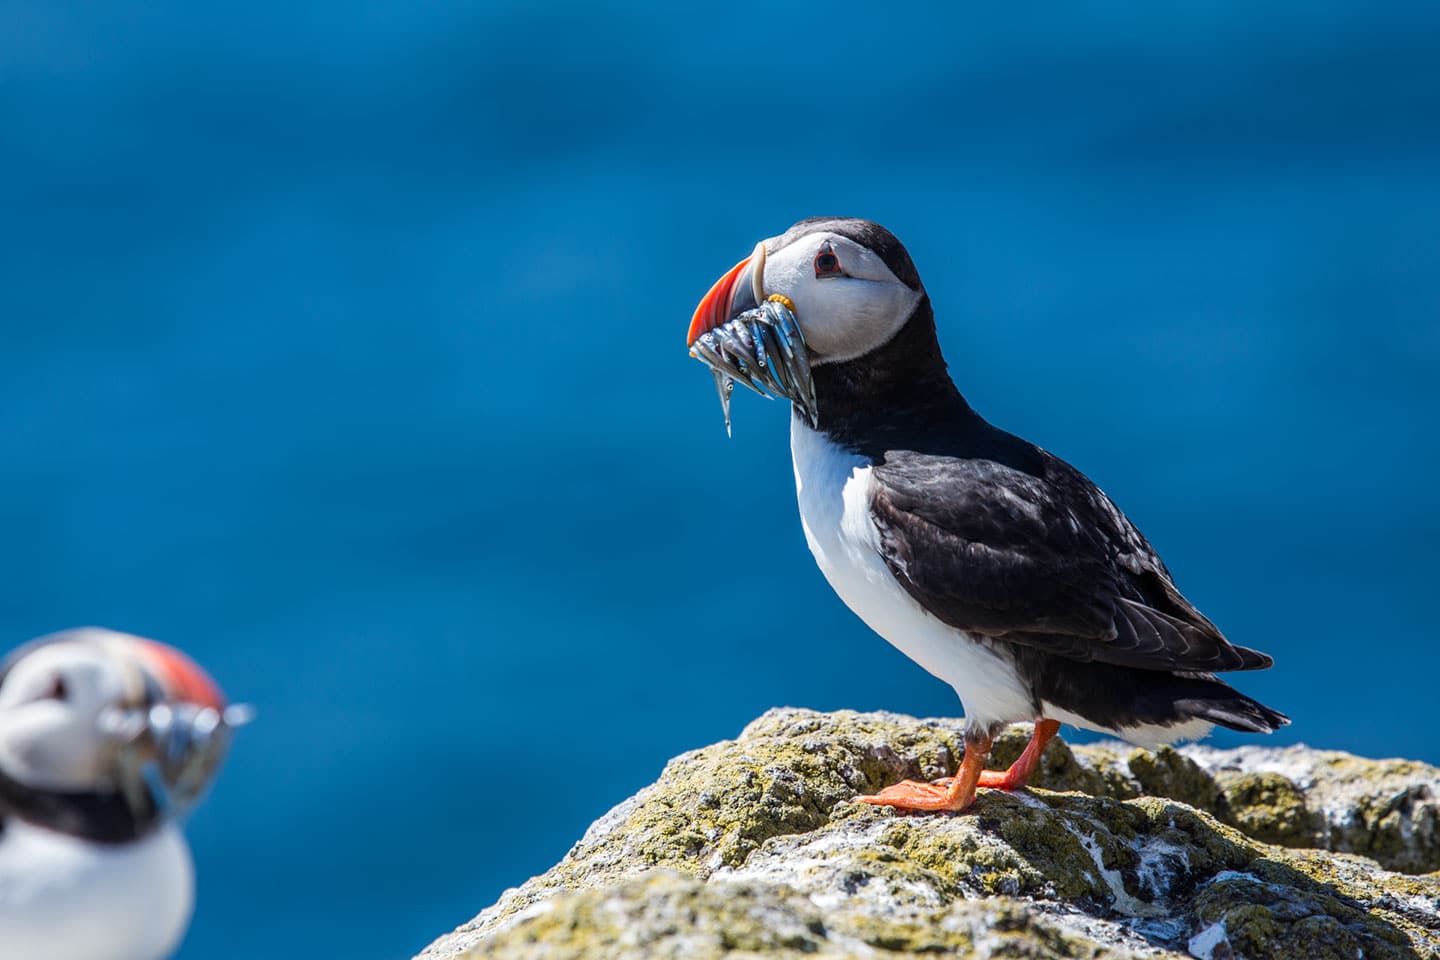 Puffin just caught fish